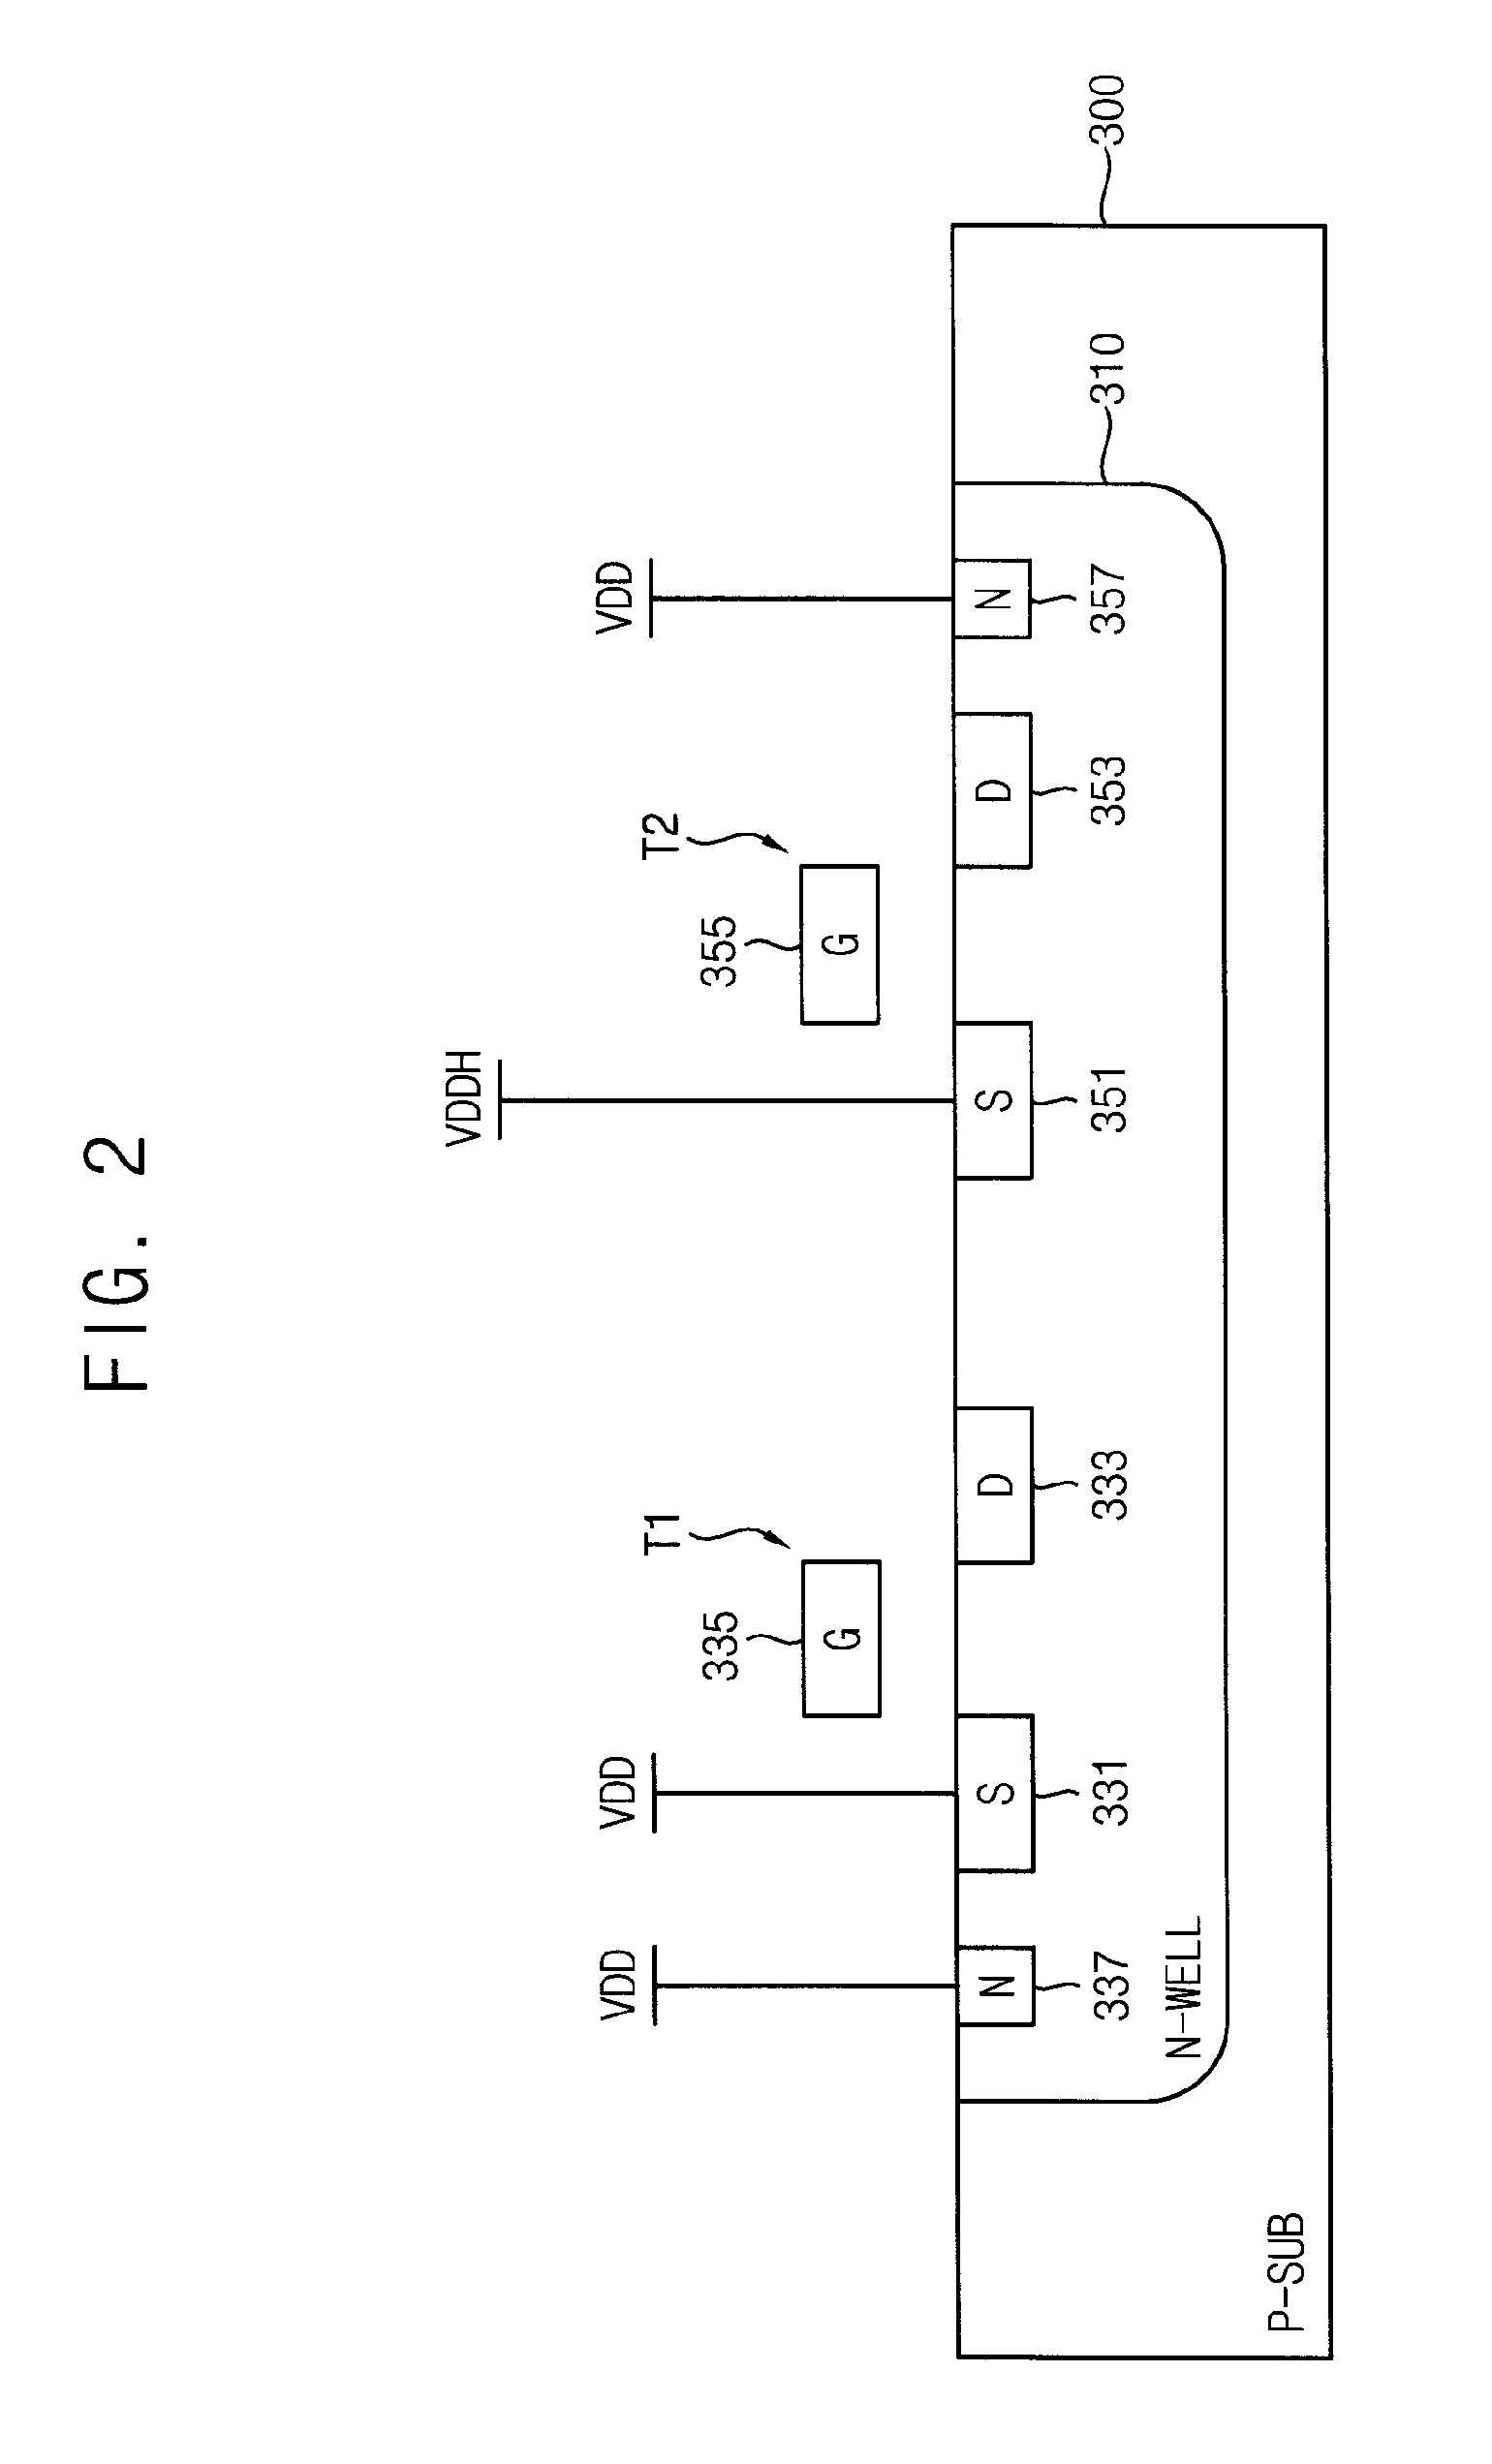 Power gating circuit and integrated circuit